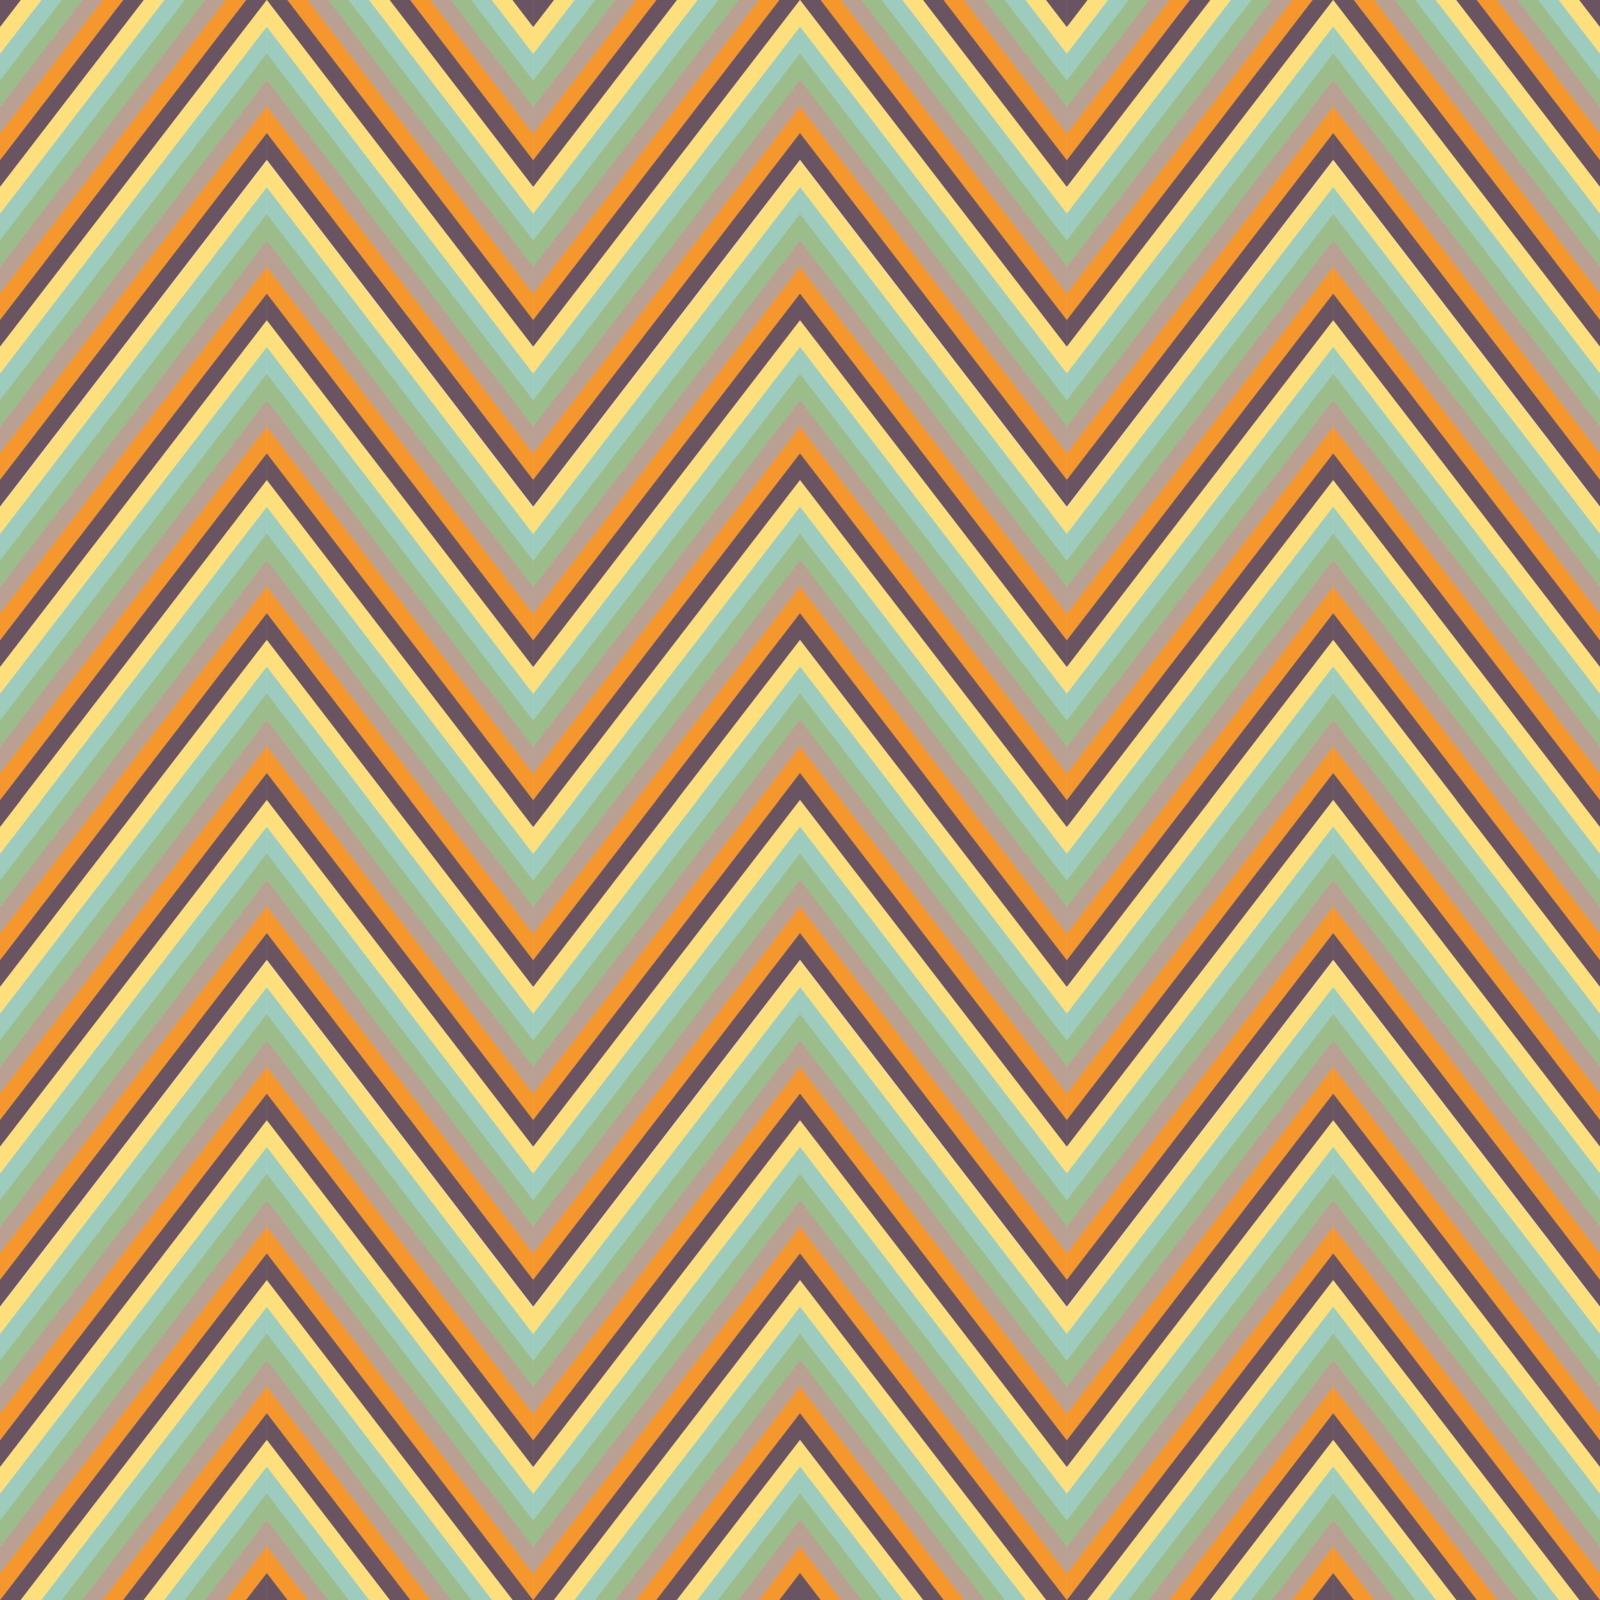 Abstract seamless retro zigzag ornament. Use as pattern fill